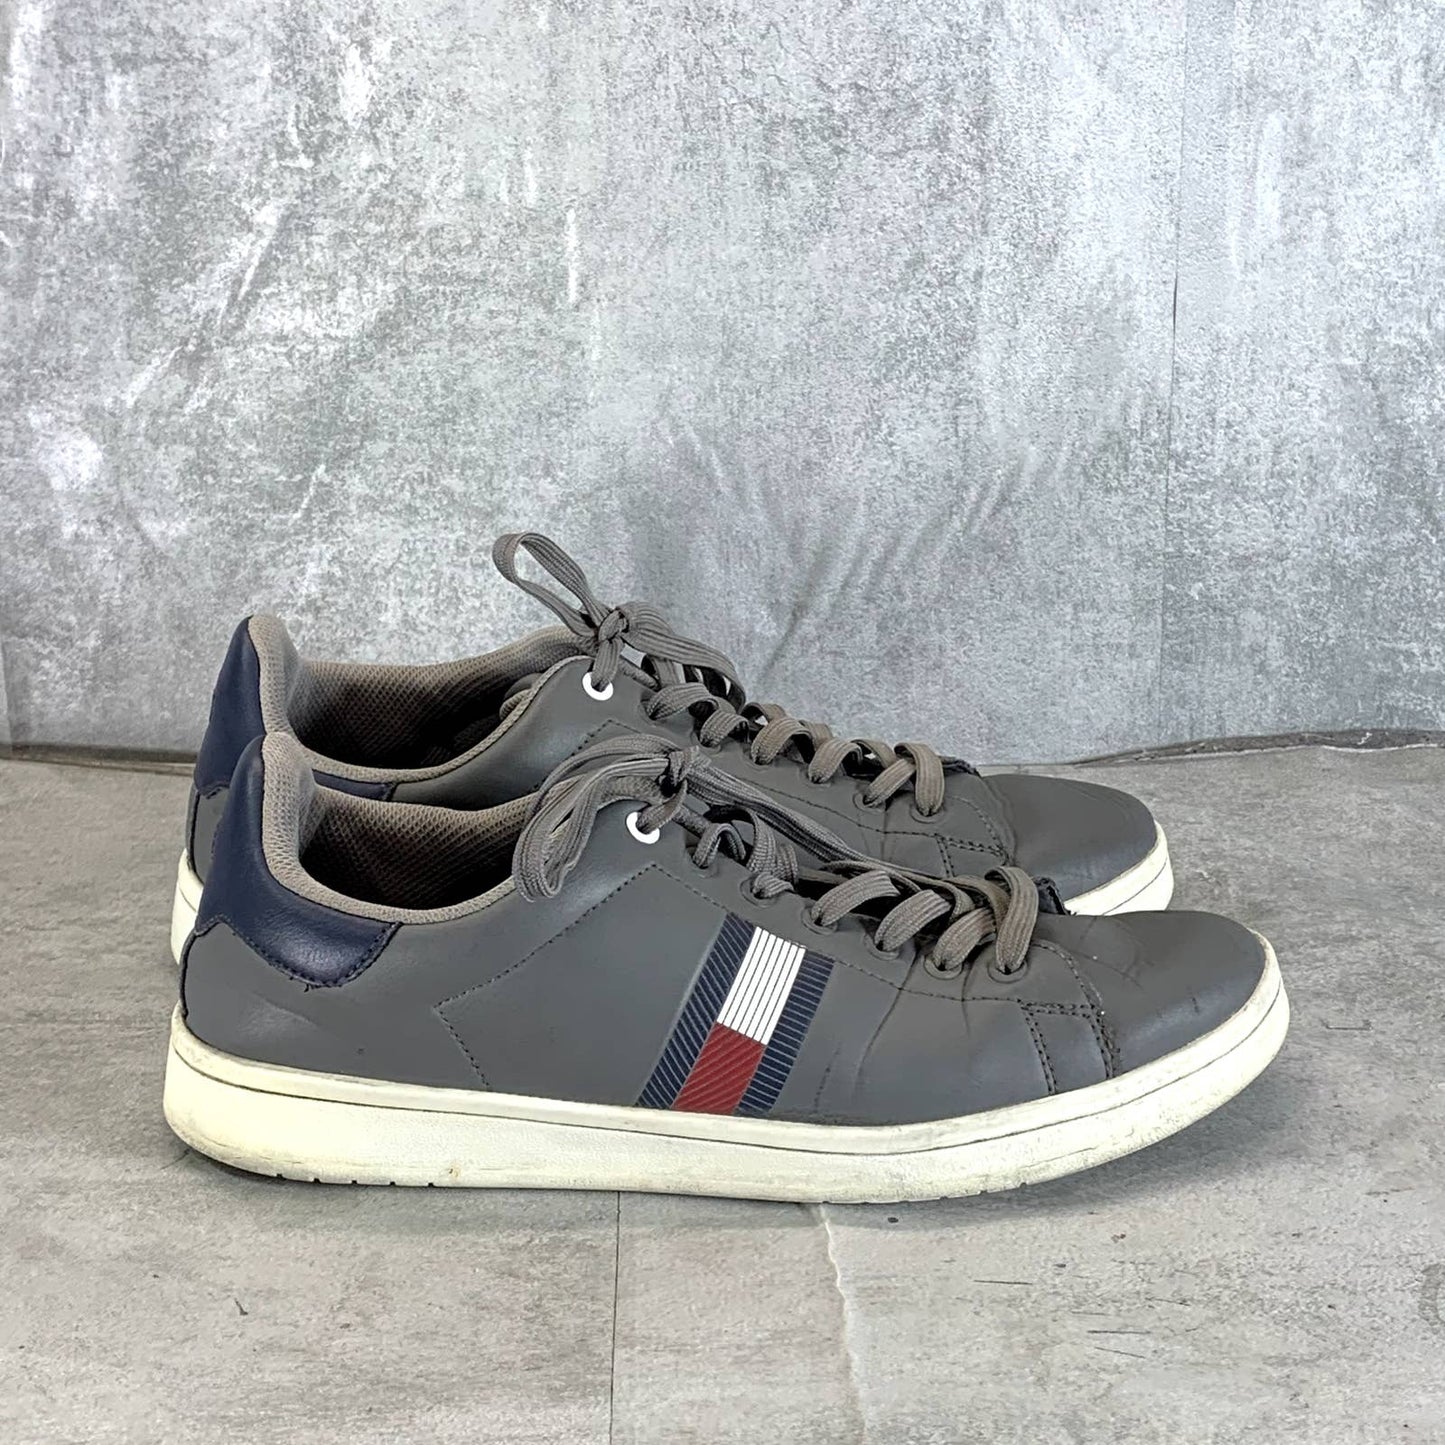 TOMMY HILFIGER Men's Gray Lampkin Lace-Up Sneakers SZ 11.5